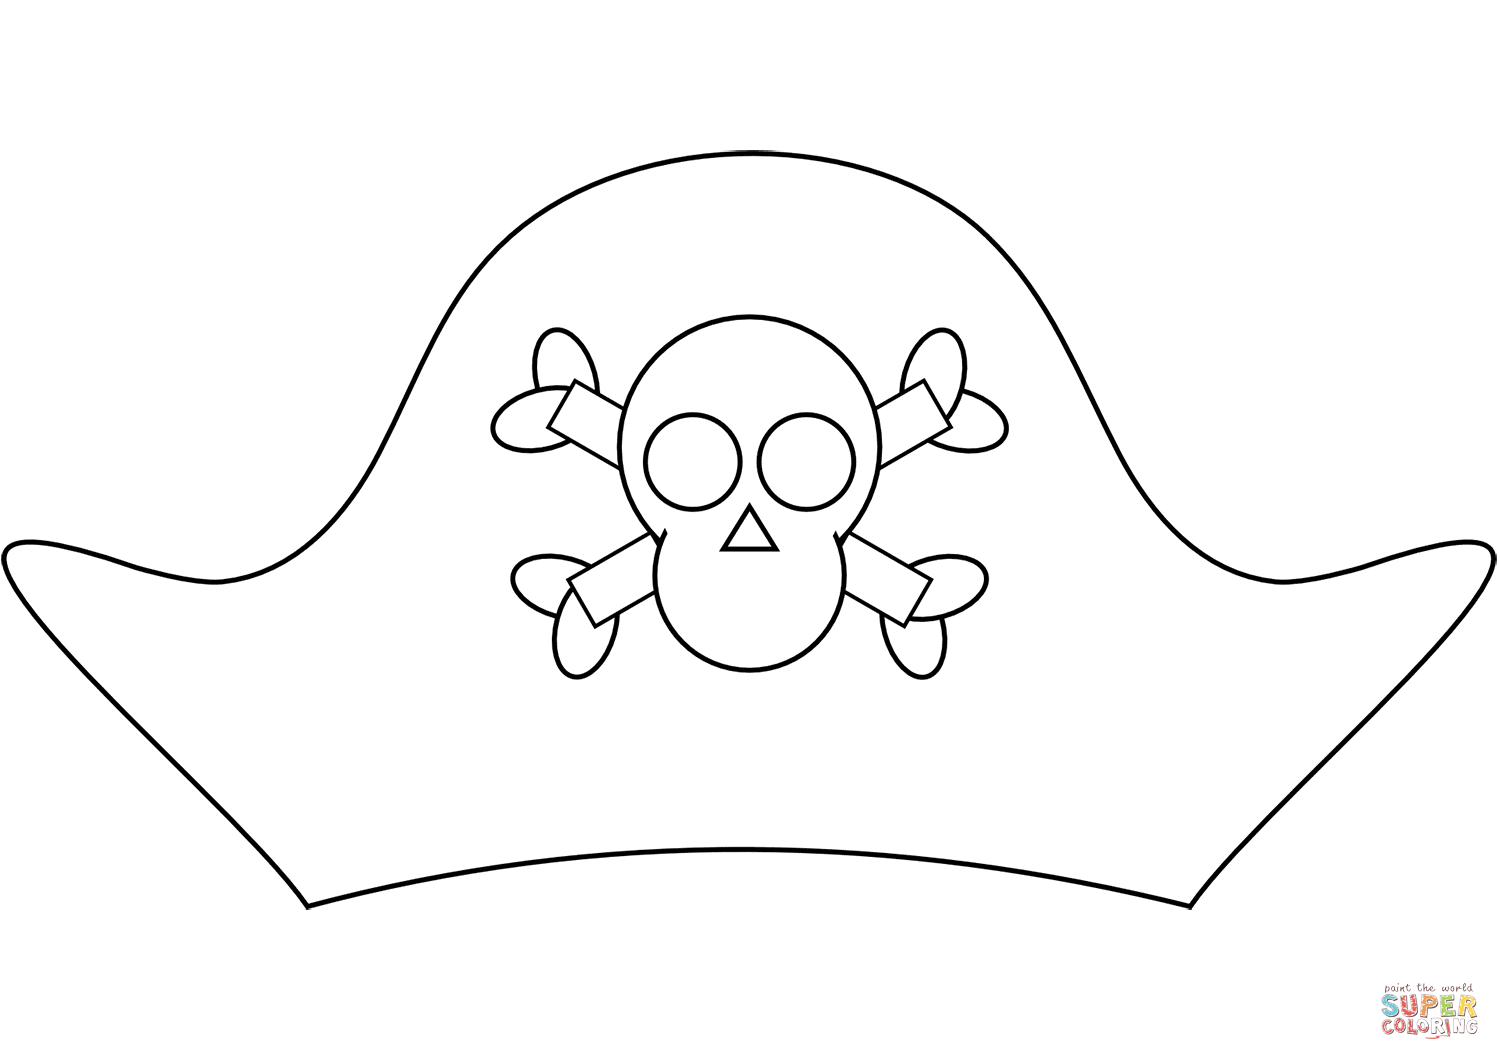 Pirate hat coloring page free printable coloring pages pirate hat crafts pirate hat template pirate hats for kids